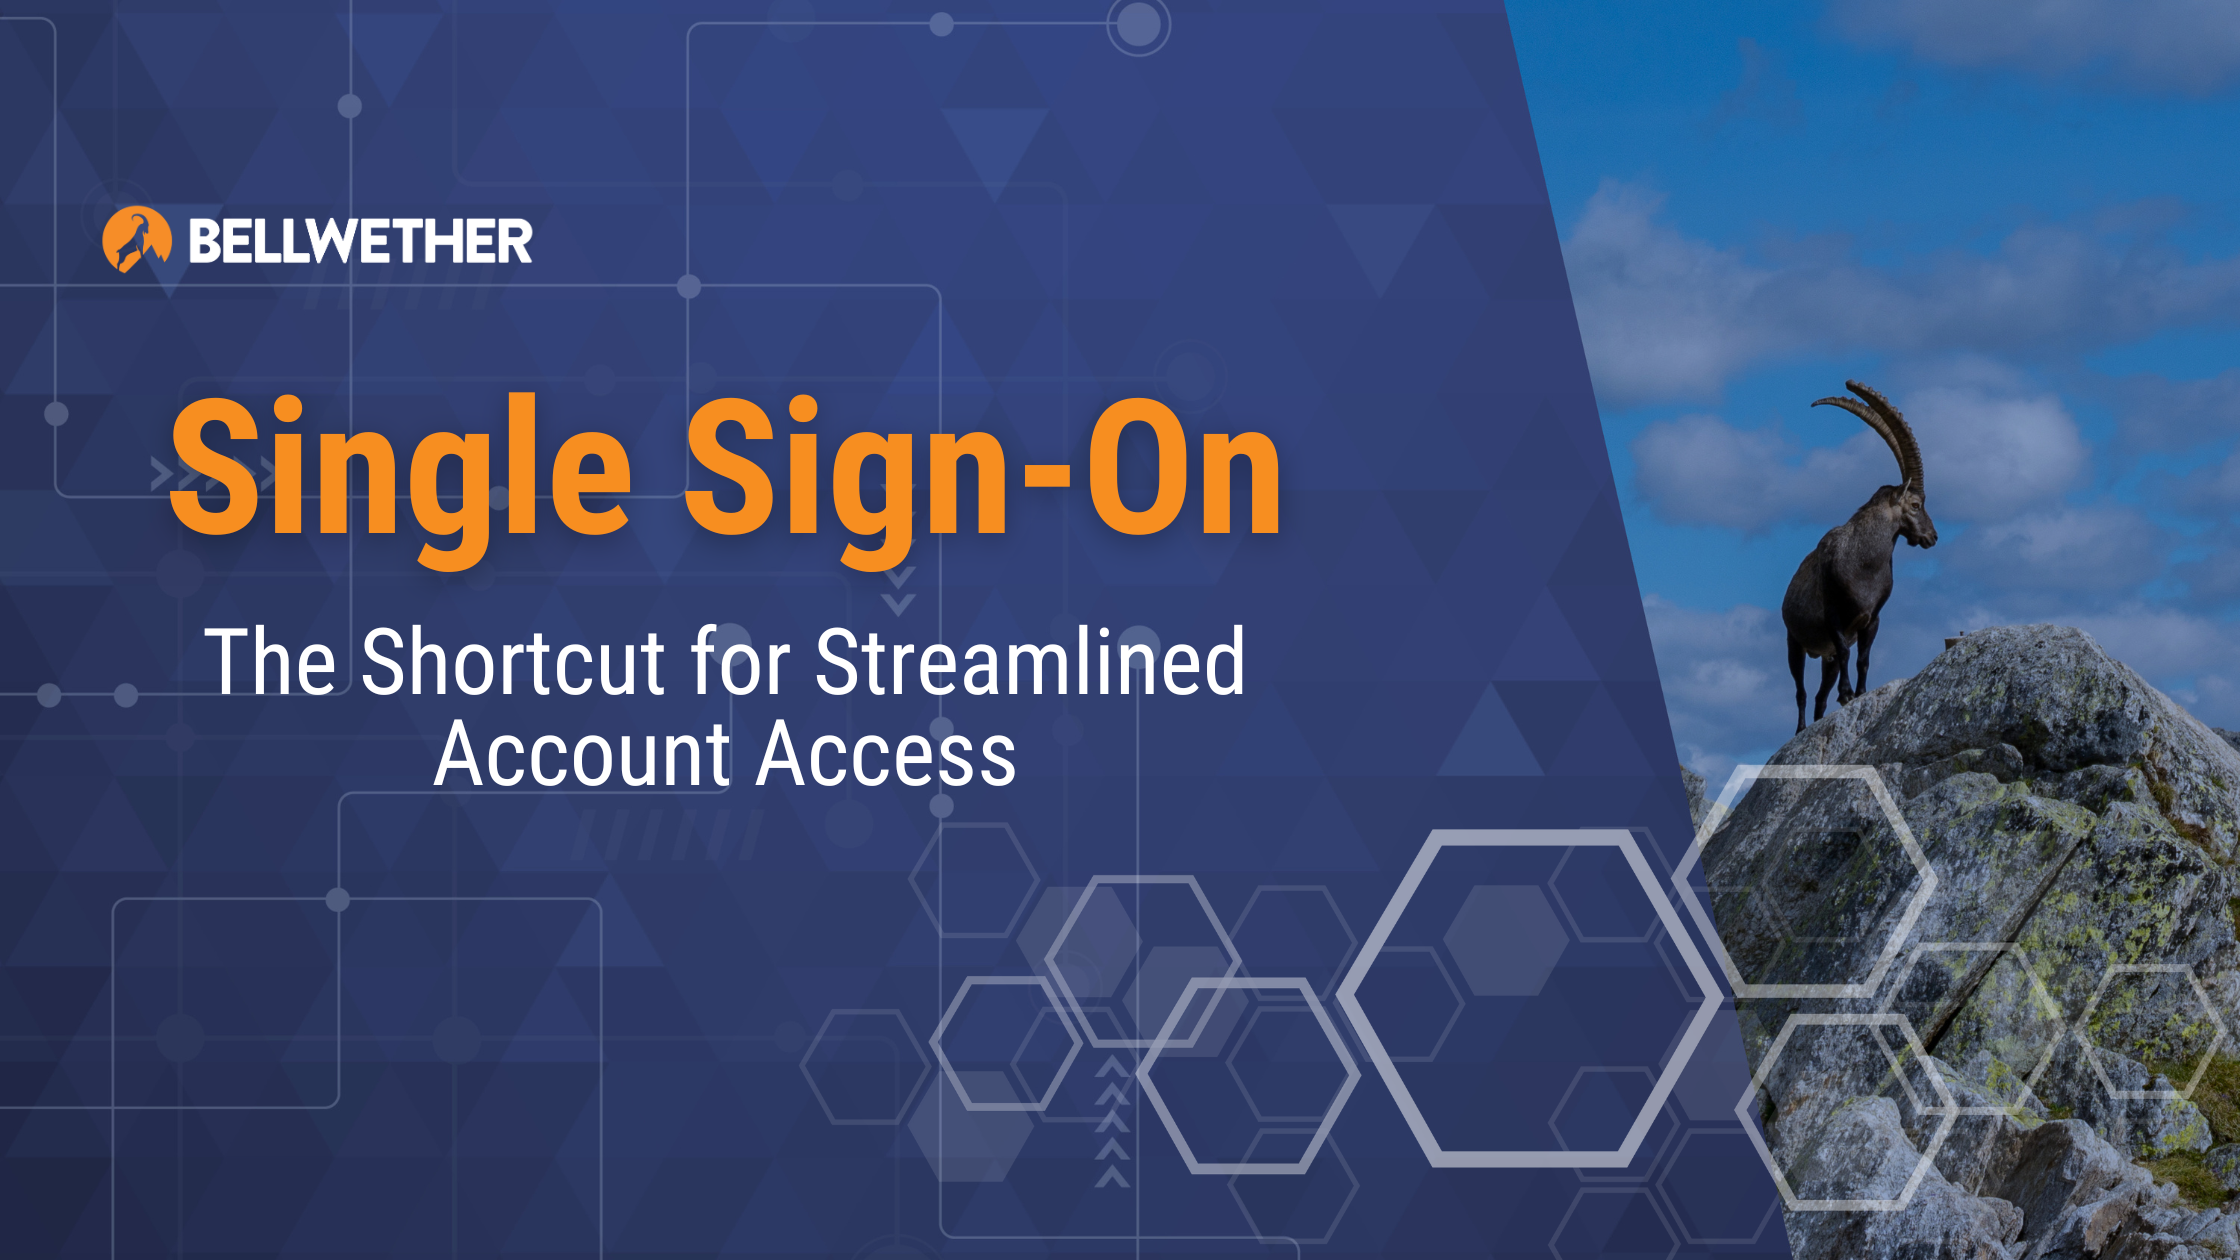 Single Sign-On: The Short Cut for Streamlined Account Access